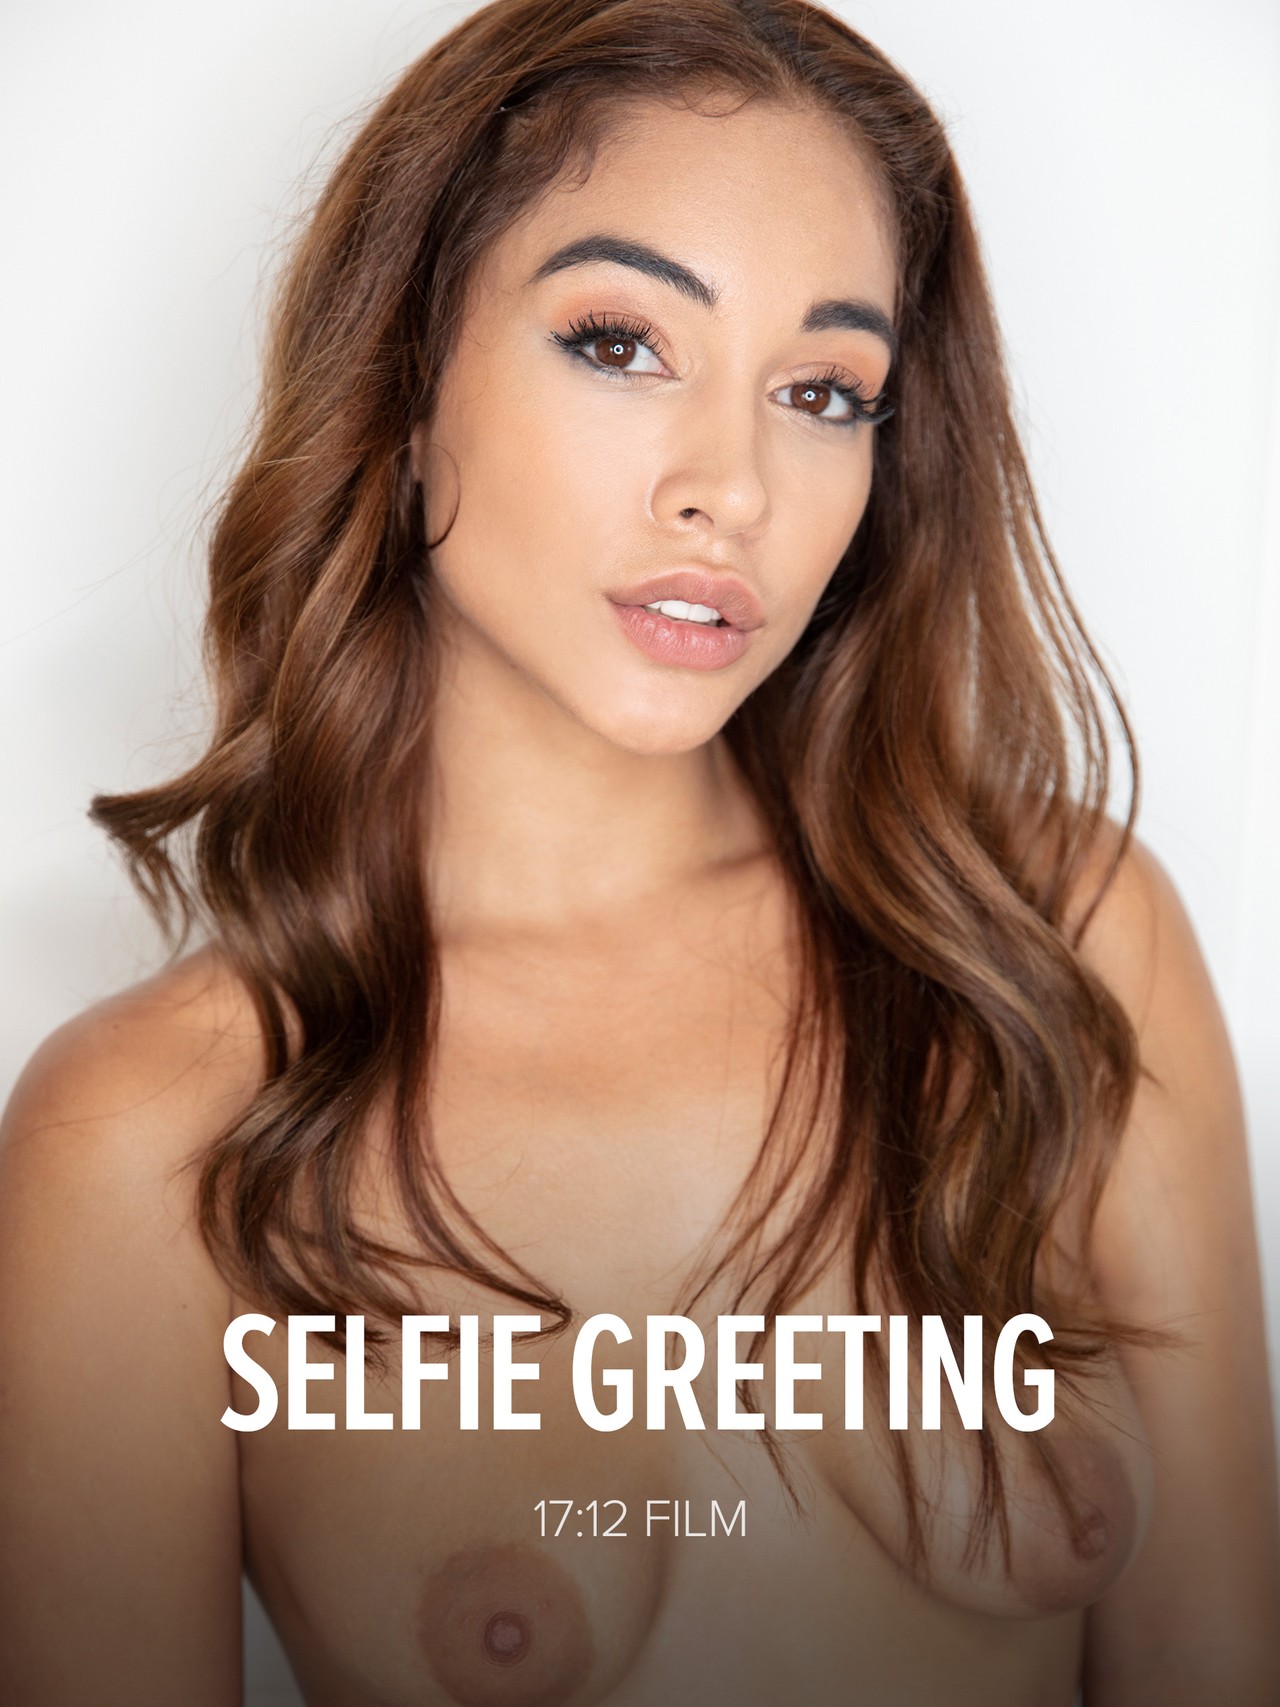 Weâ€™re experimenting a new style of casting videos â€“ a selfie made directly by each of our new models. We feel the girls are more authentic when they are in charge. But without further ado â€“ take a look Ginebraâ€™s hot masterpiece! Isnâ€™t she just stunning?!